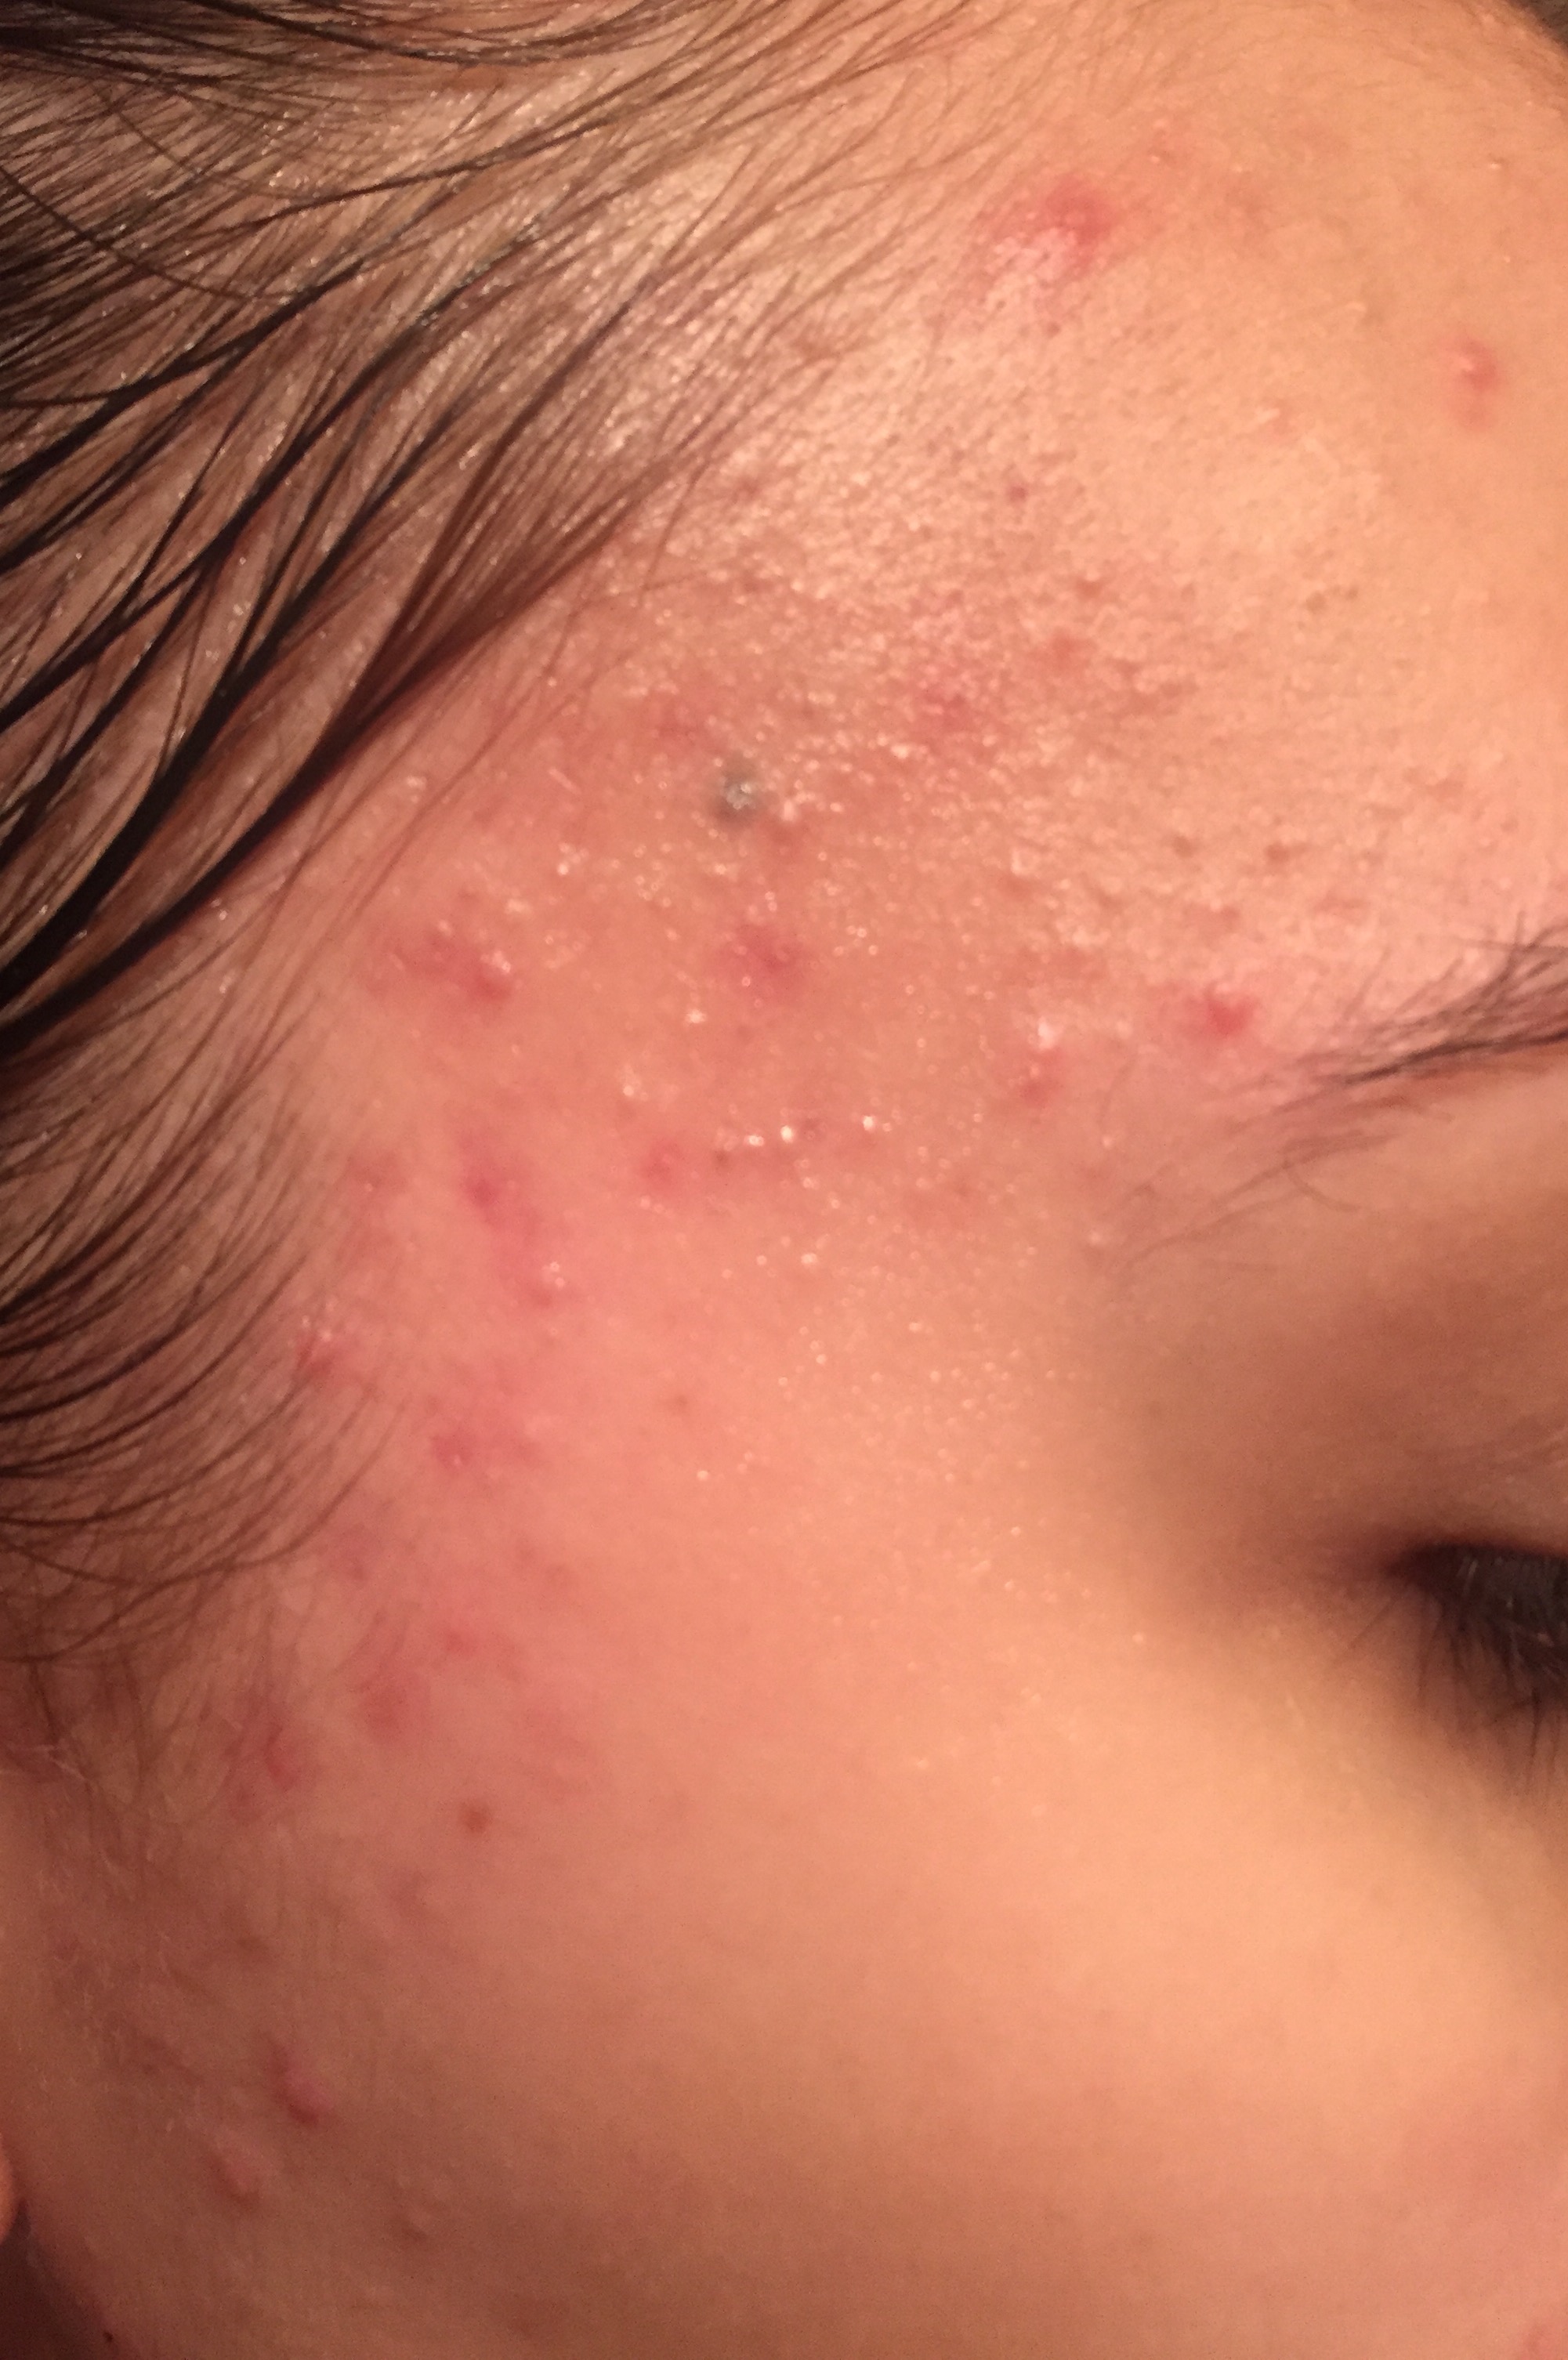 Weird acne all over face? - General acne discussion - by anjehlah1